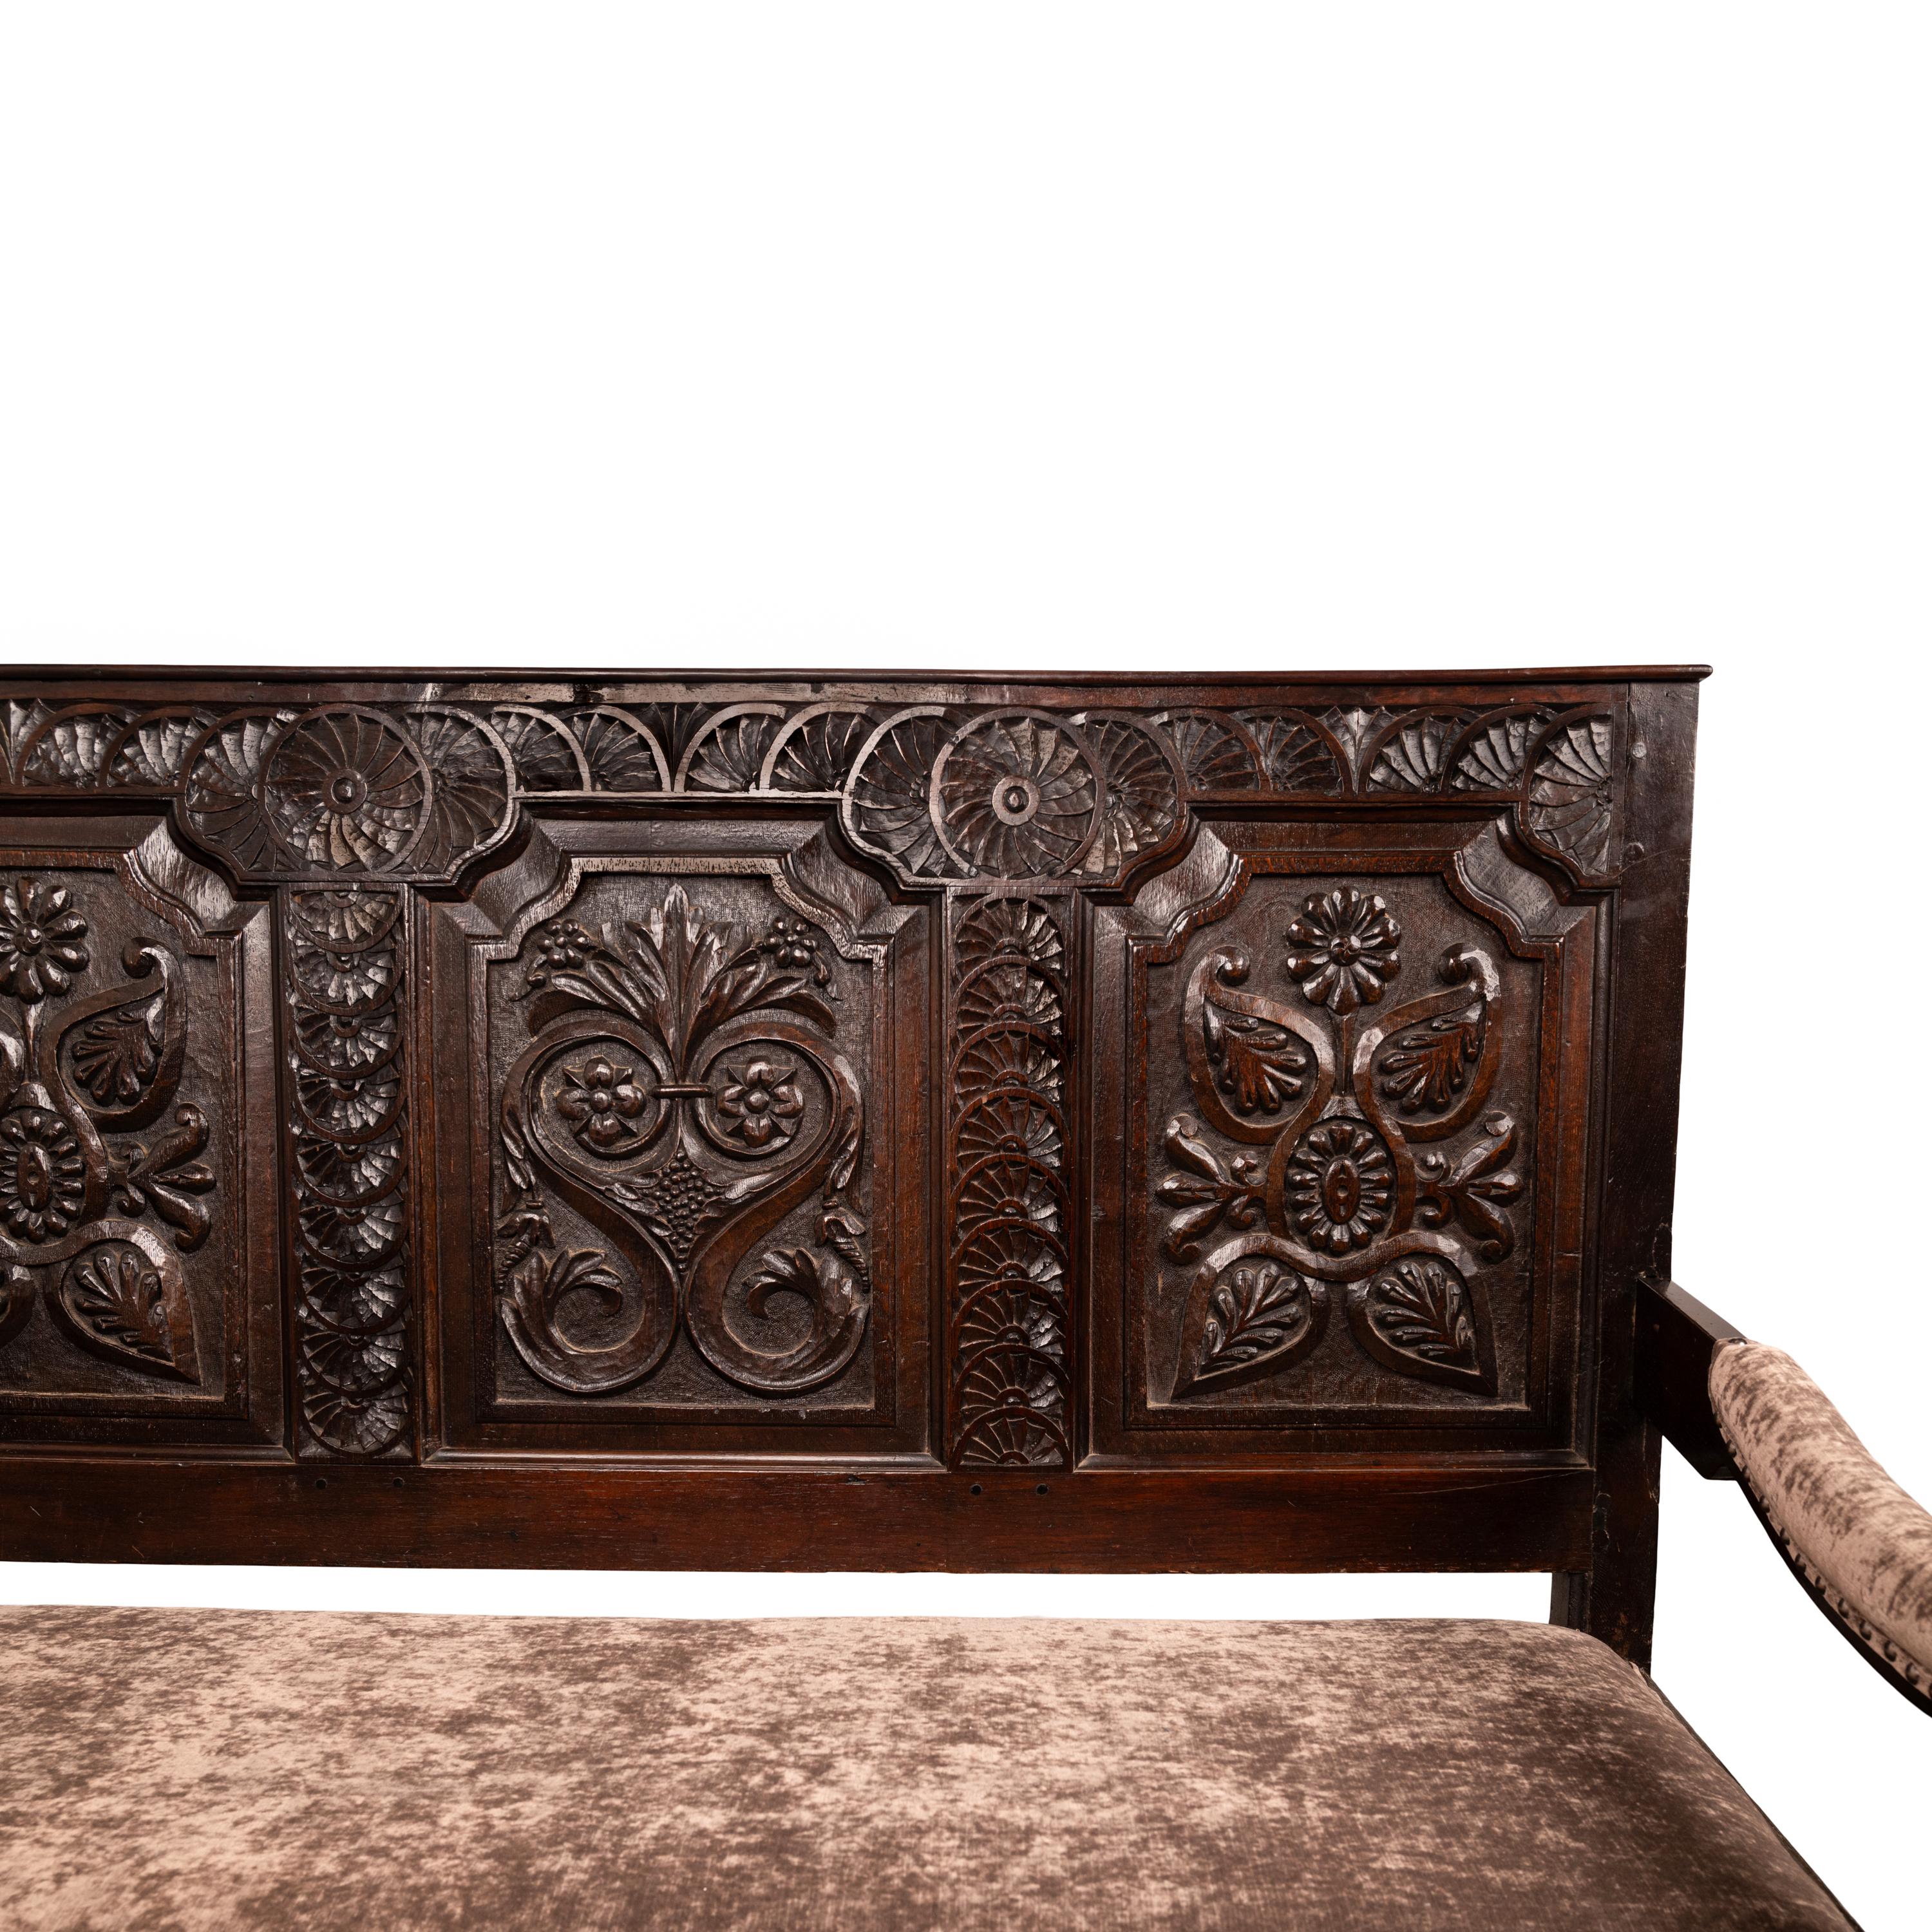 Antique English 17th Century King Charles II Carved Oak Settle Sofa Bench 1680 For Sale 6